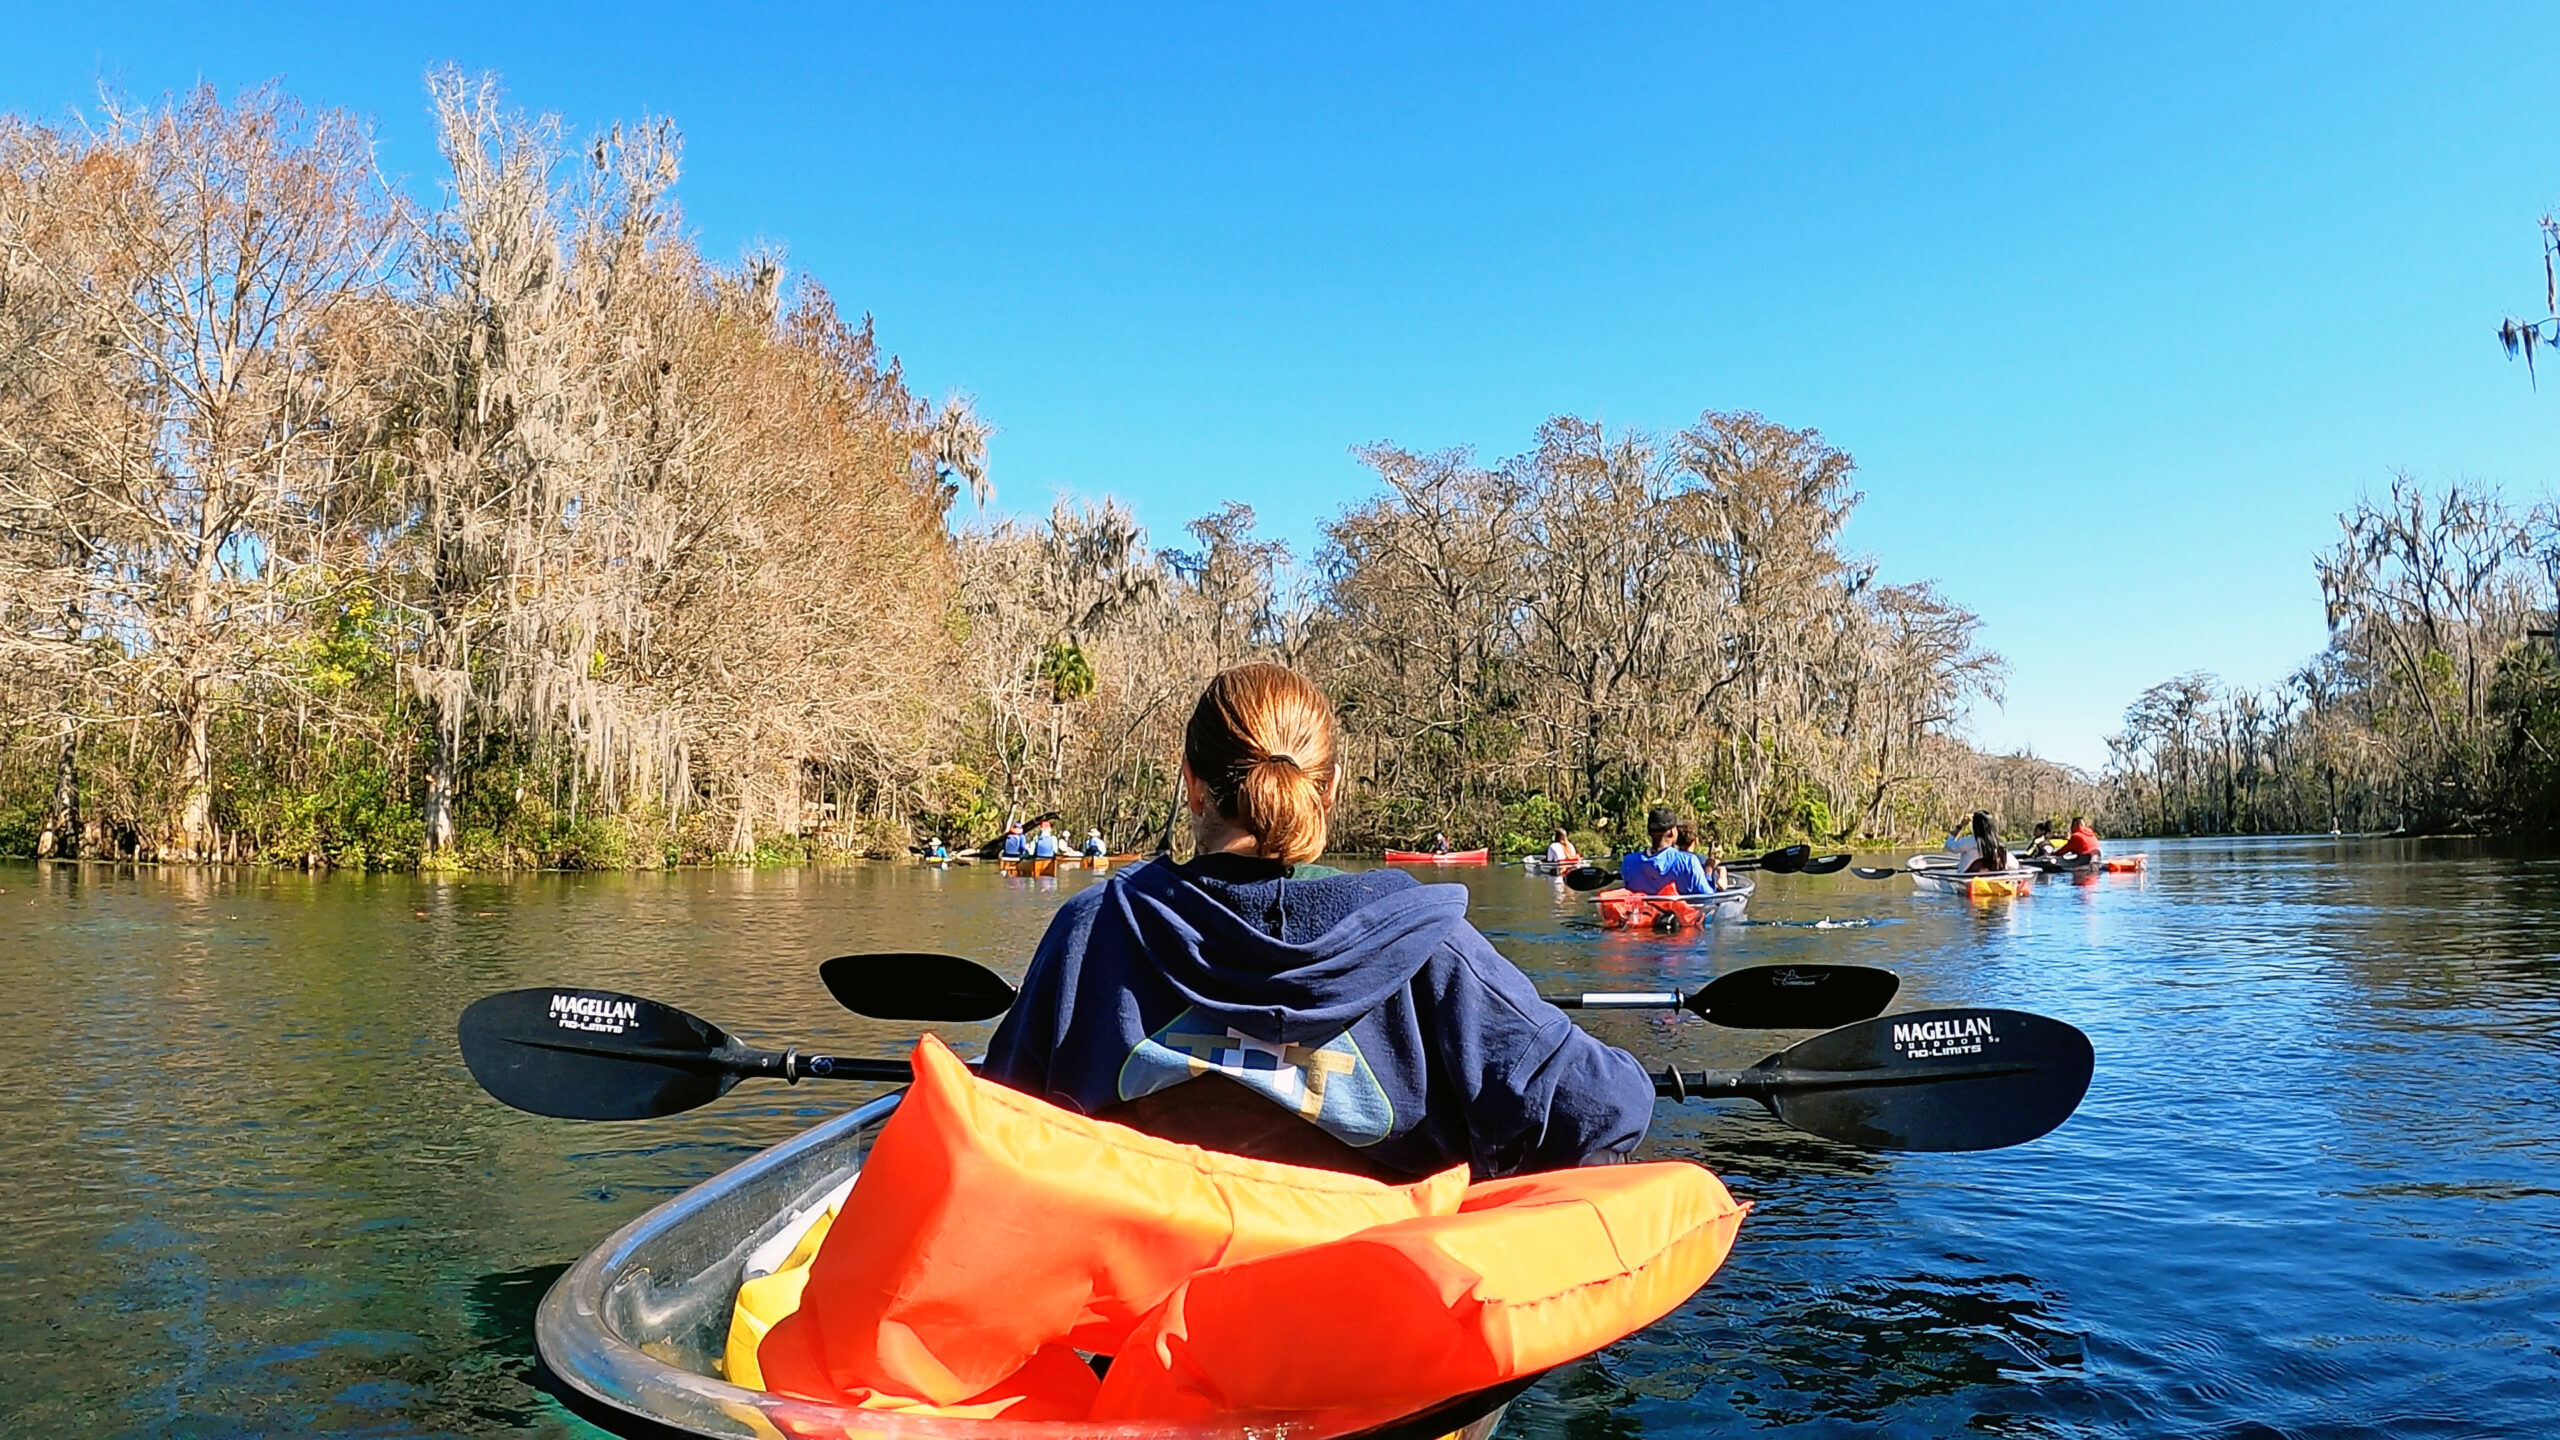 Awesome Clear Kayaking Adventure: Get Up and Go Kayaking